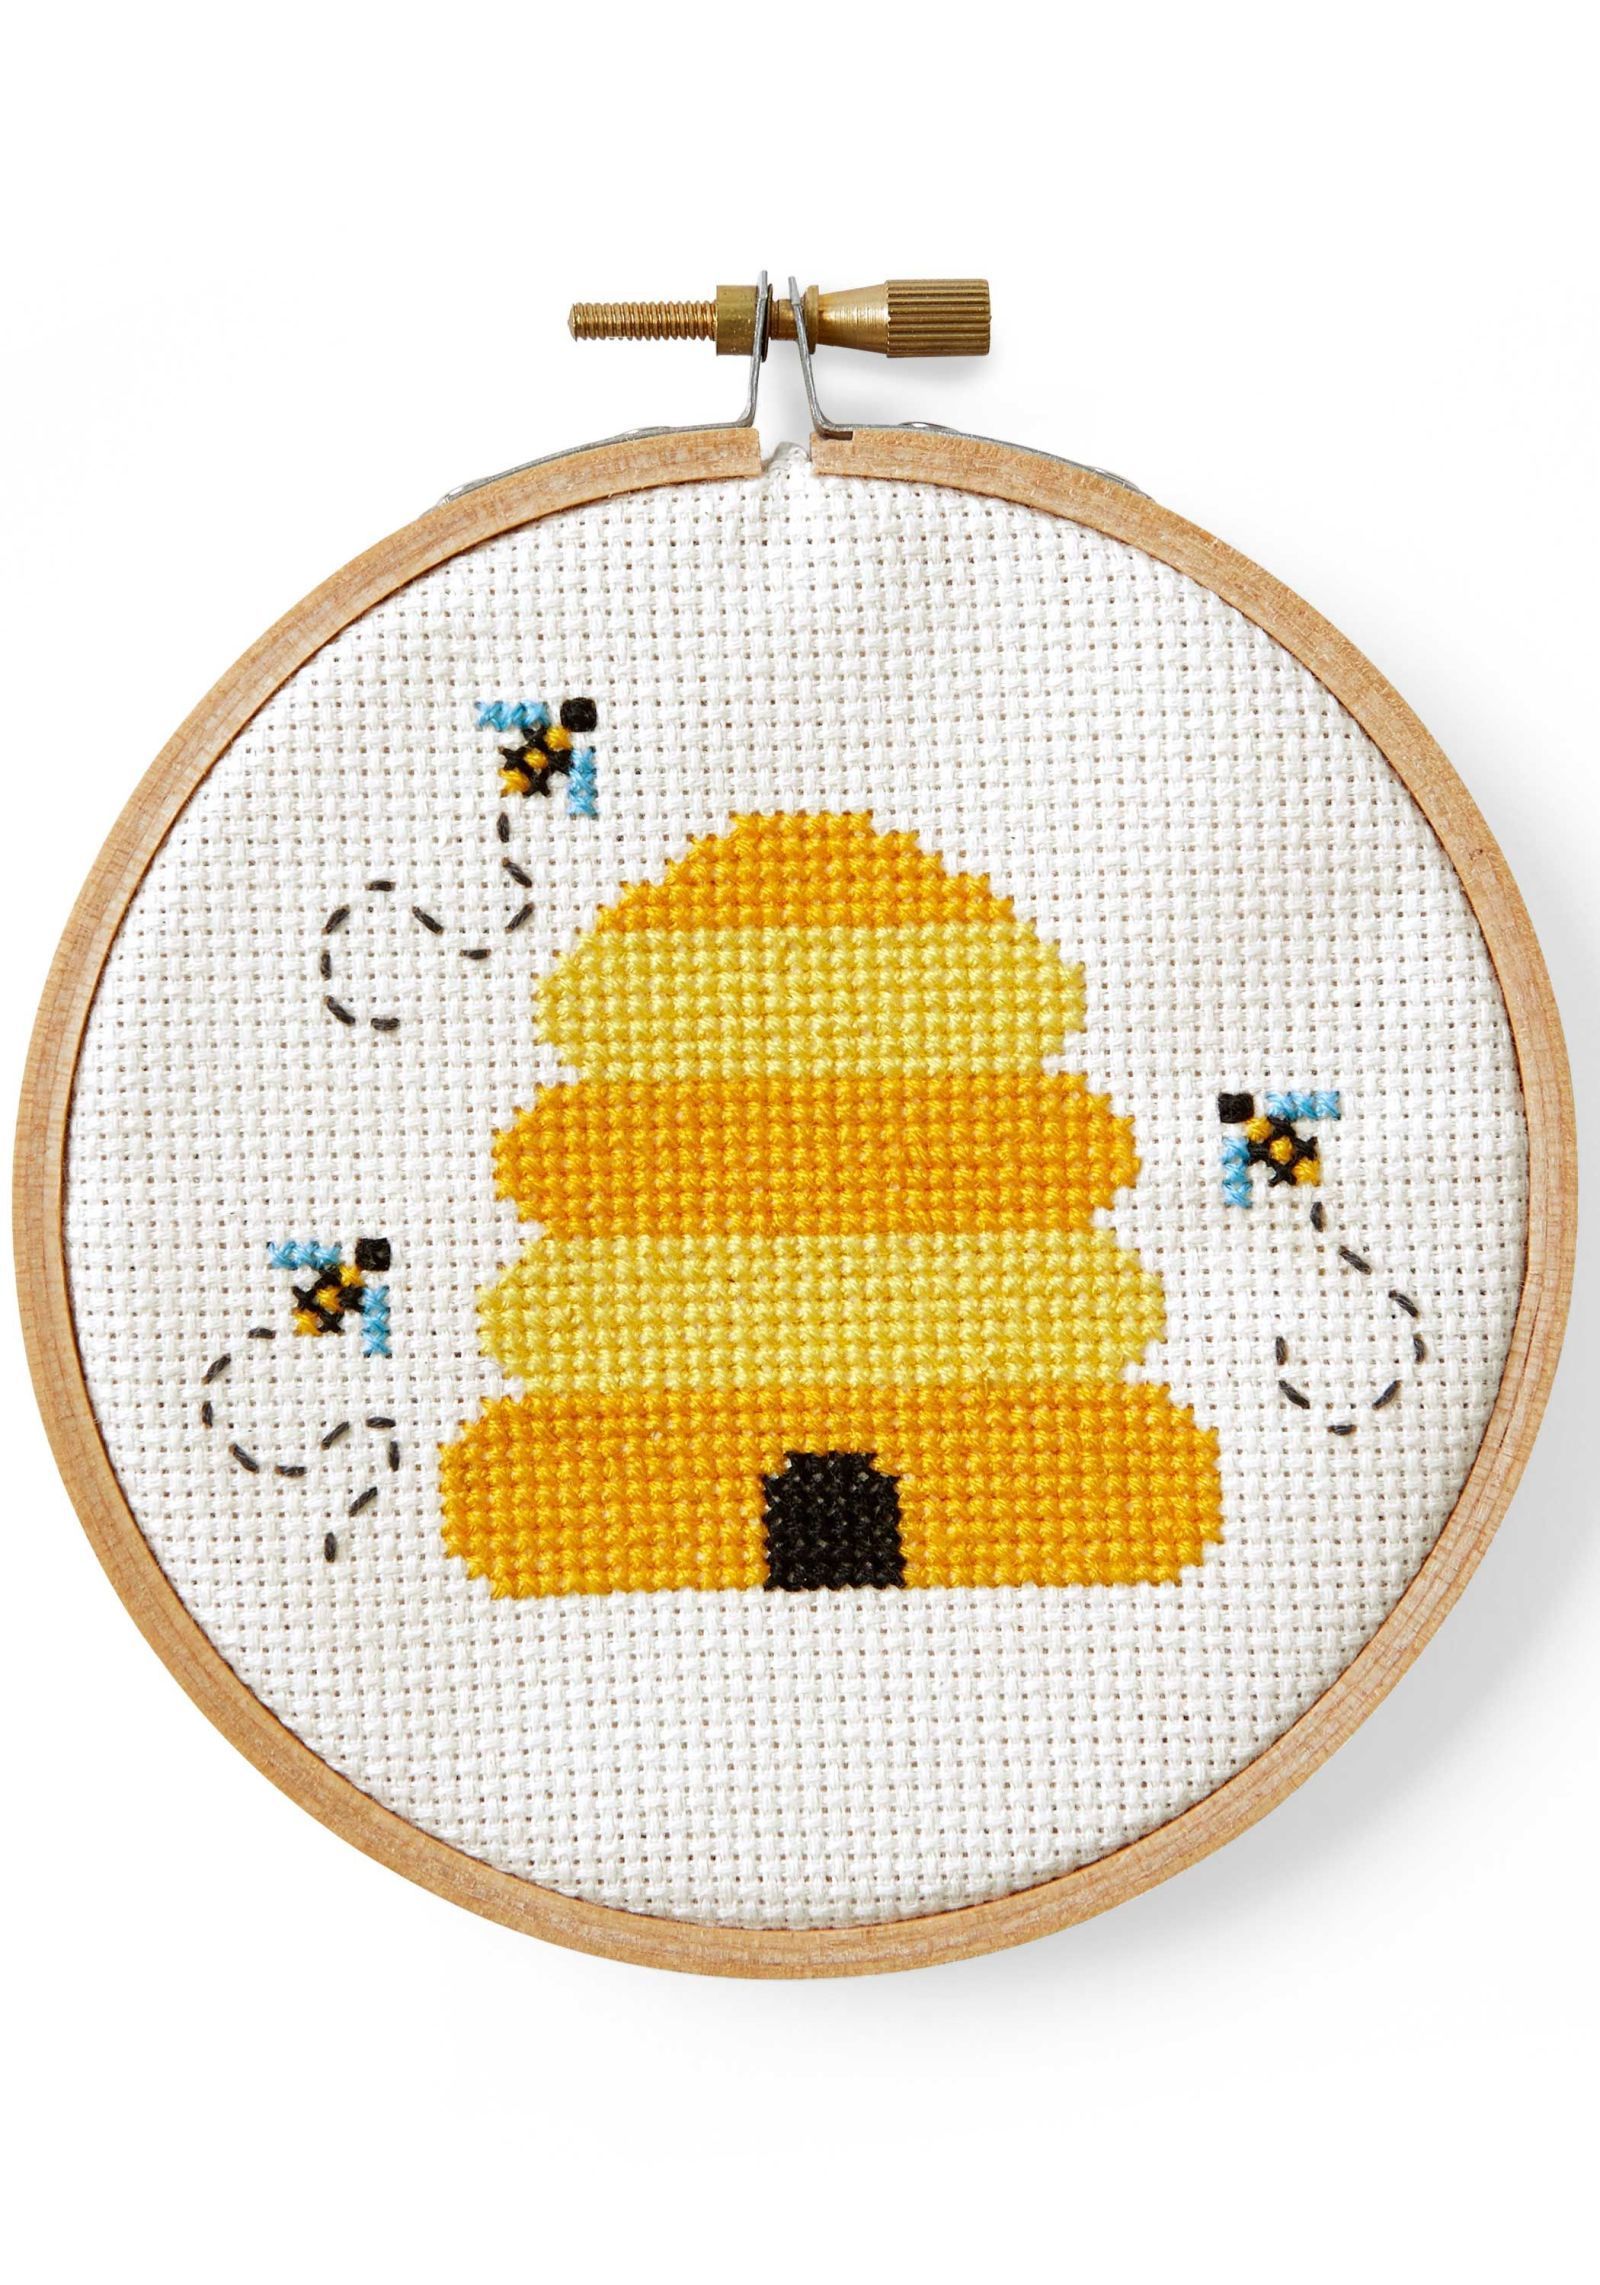 Country Living's Free Cross-Stitch Patterns  - CountryLiving.com